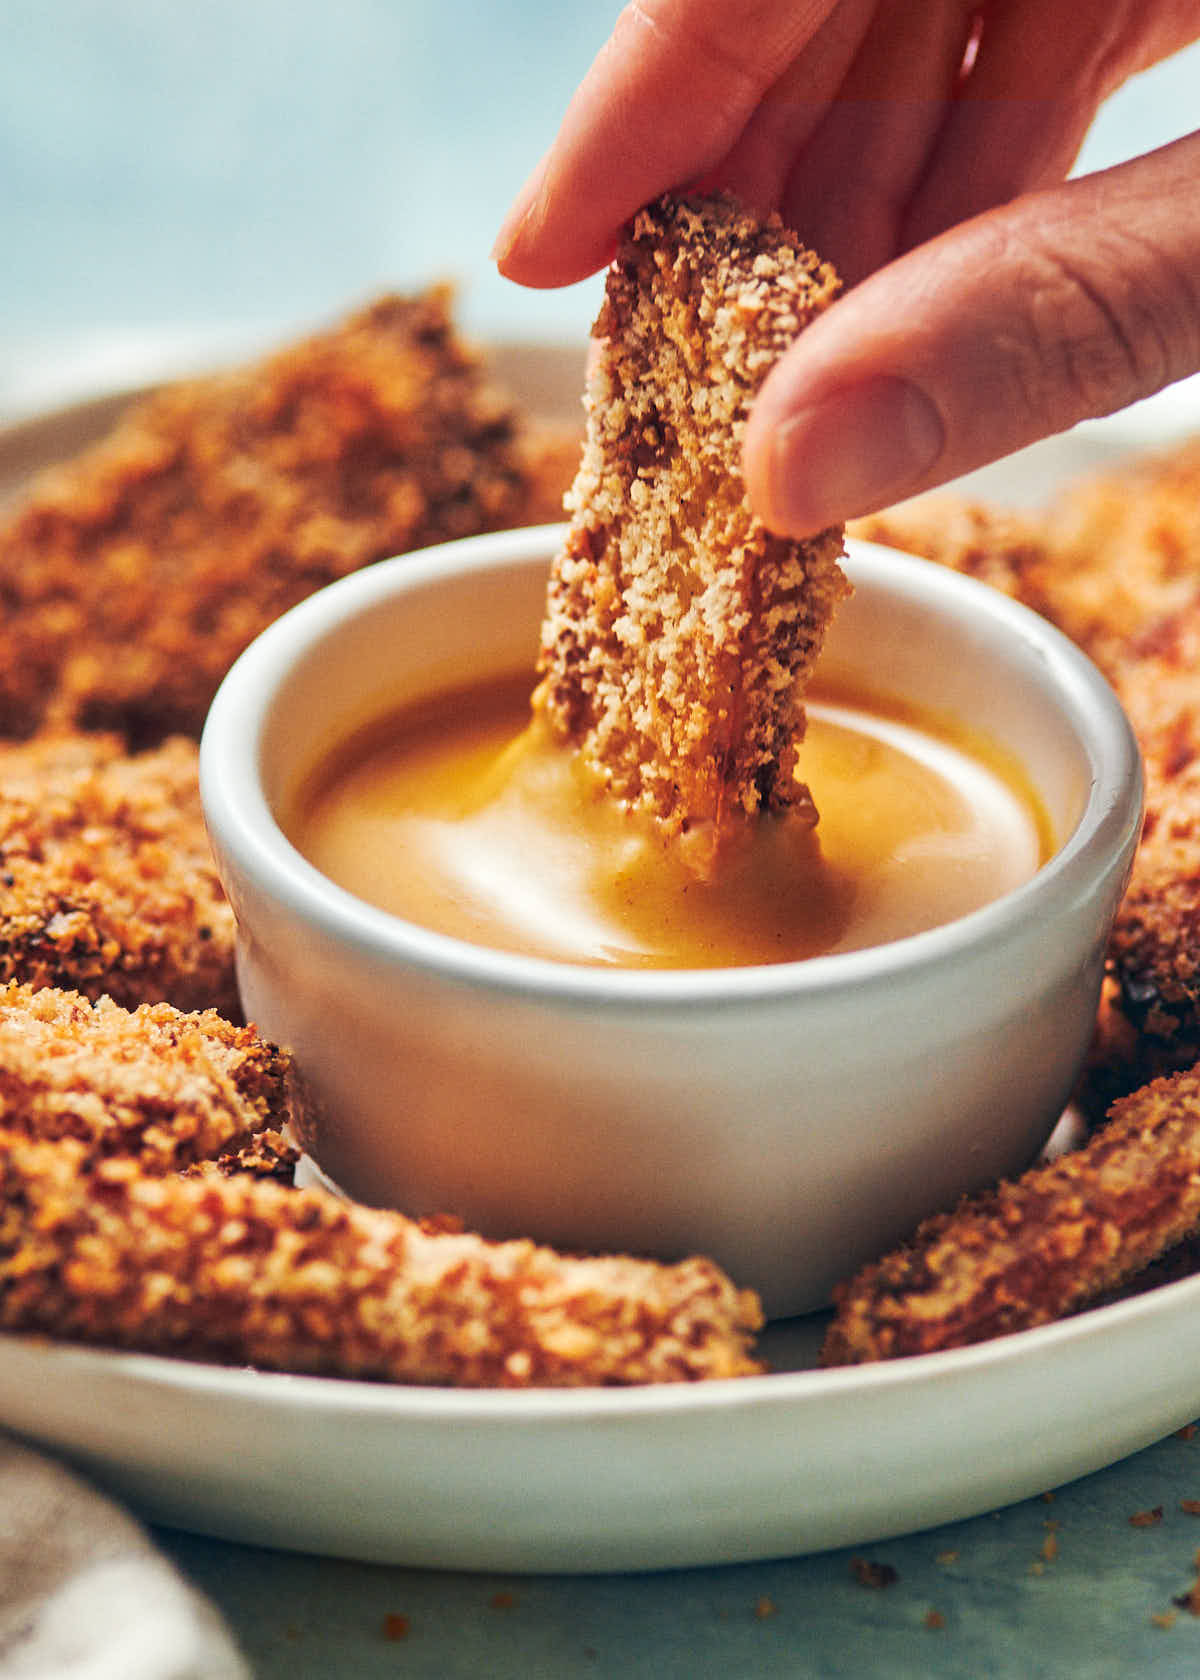 A hand holding a piece of crispy panko crusted tofu, dipping it into a bowl of honey mustard sauce.